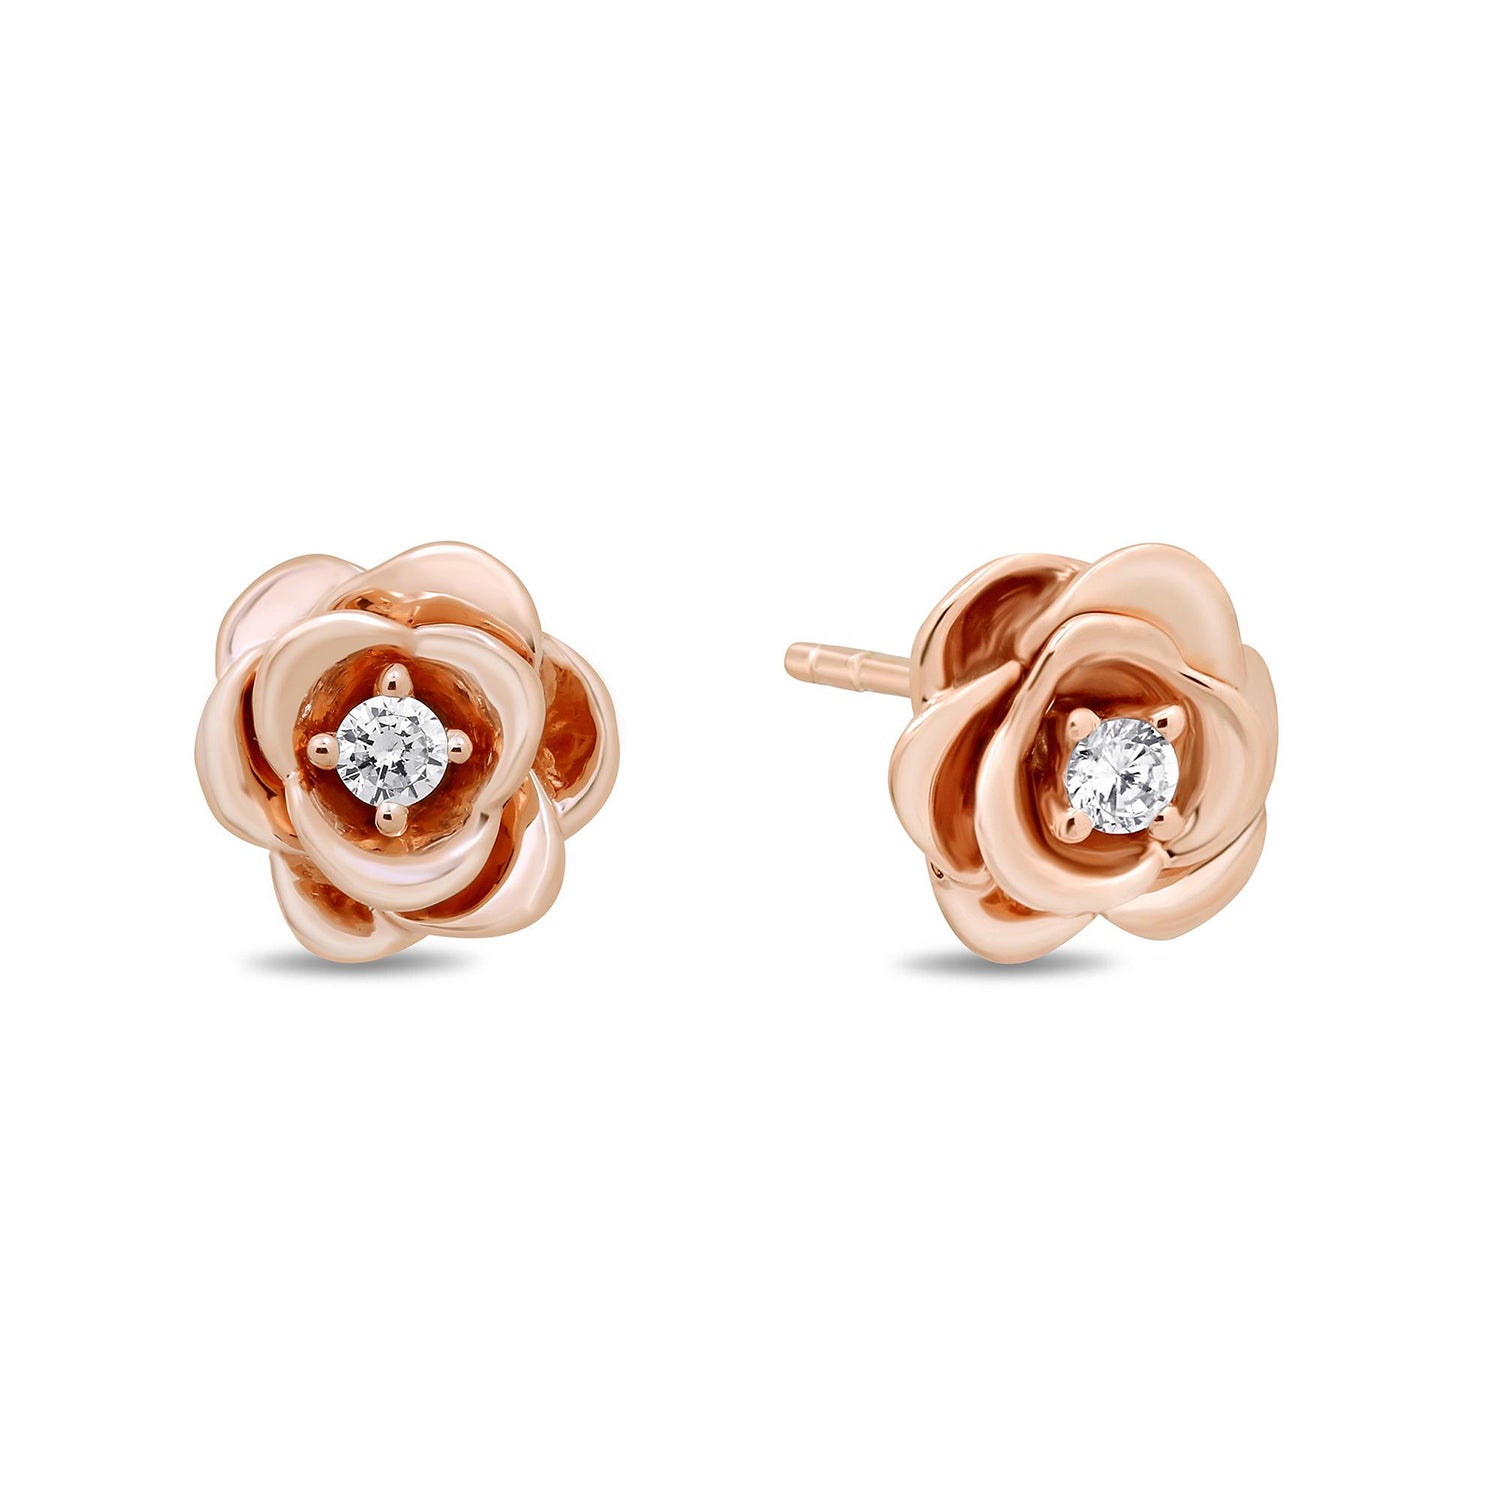 Elaine Opal and Lace earrings rose gold - Monika Knutsson